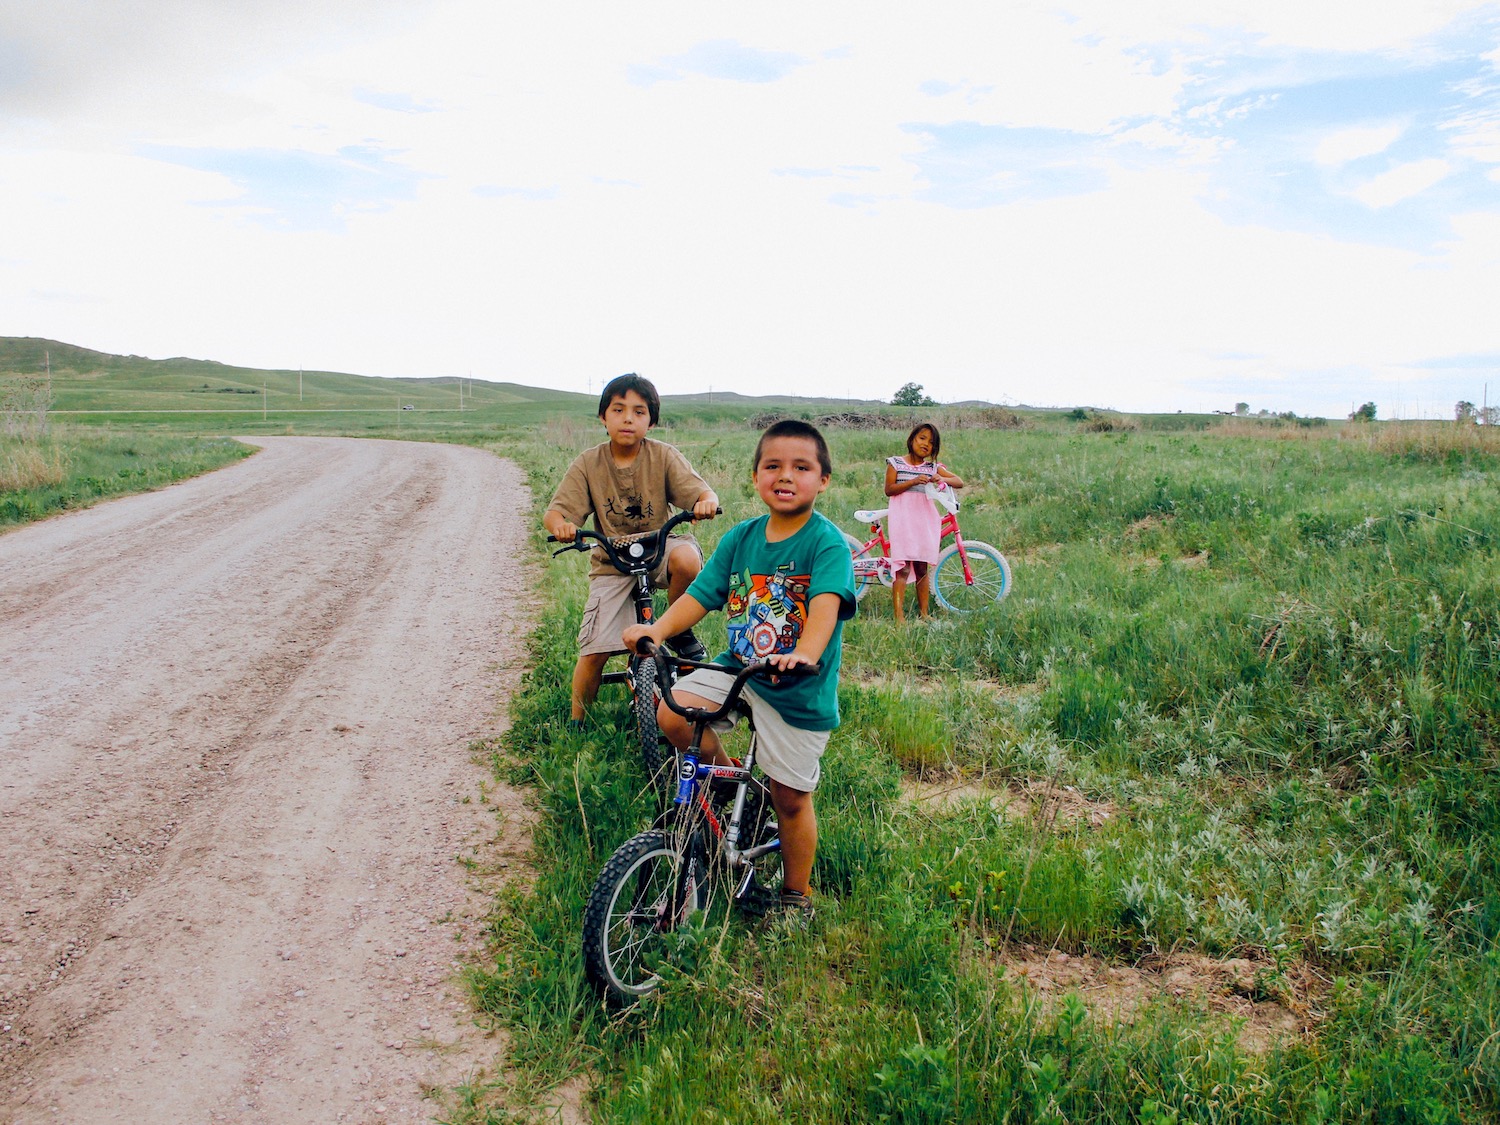 Editorial: Drugs and alcohol are ruining our way of life in Lakota country